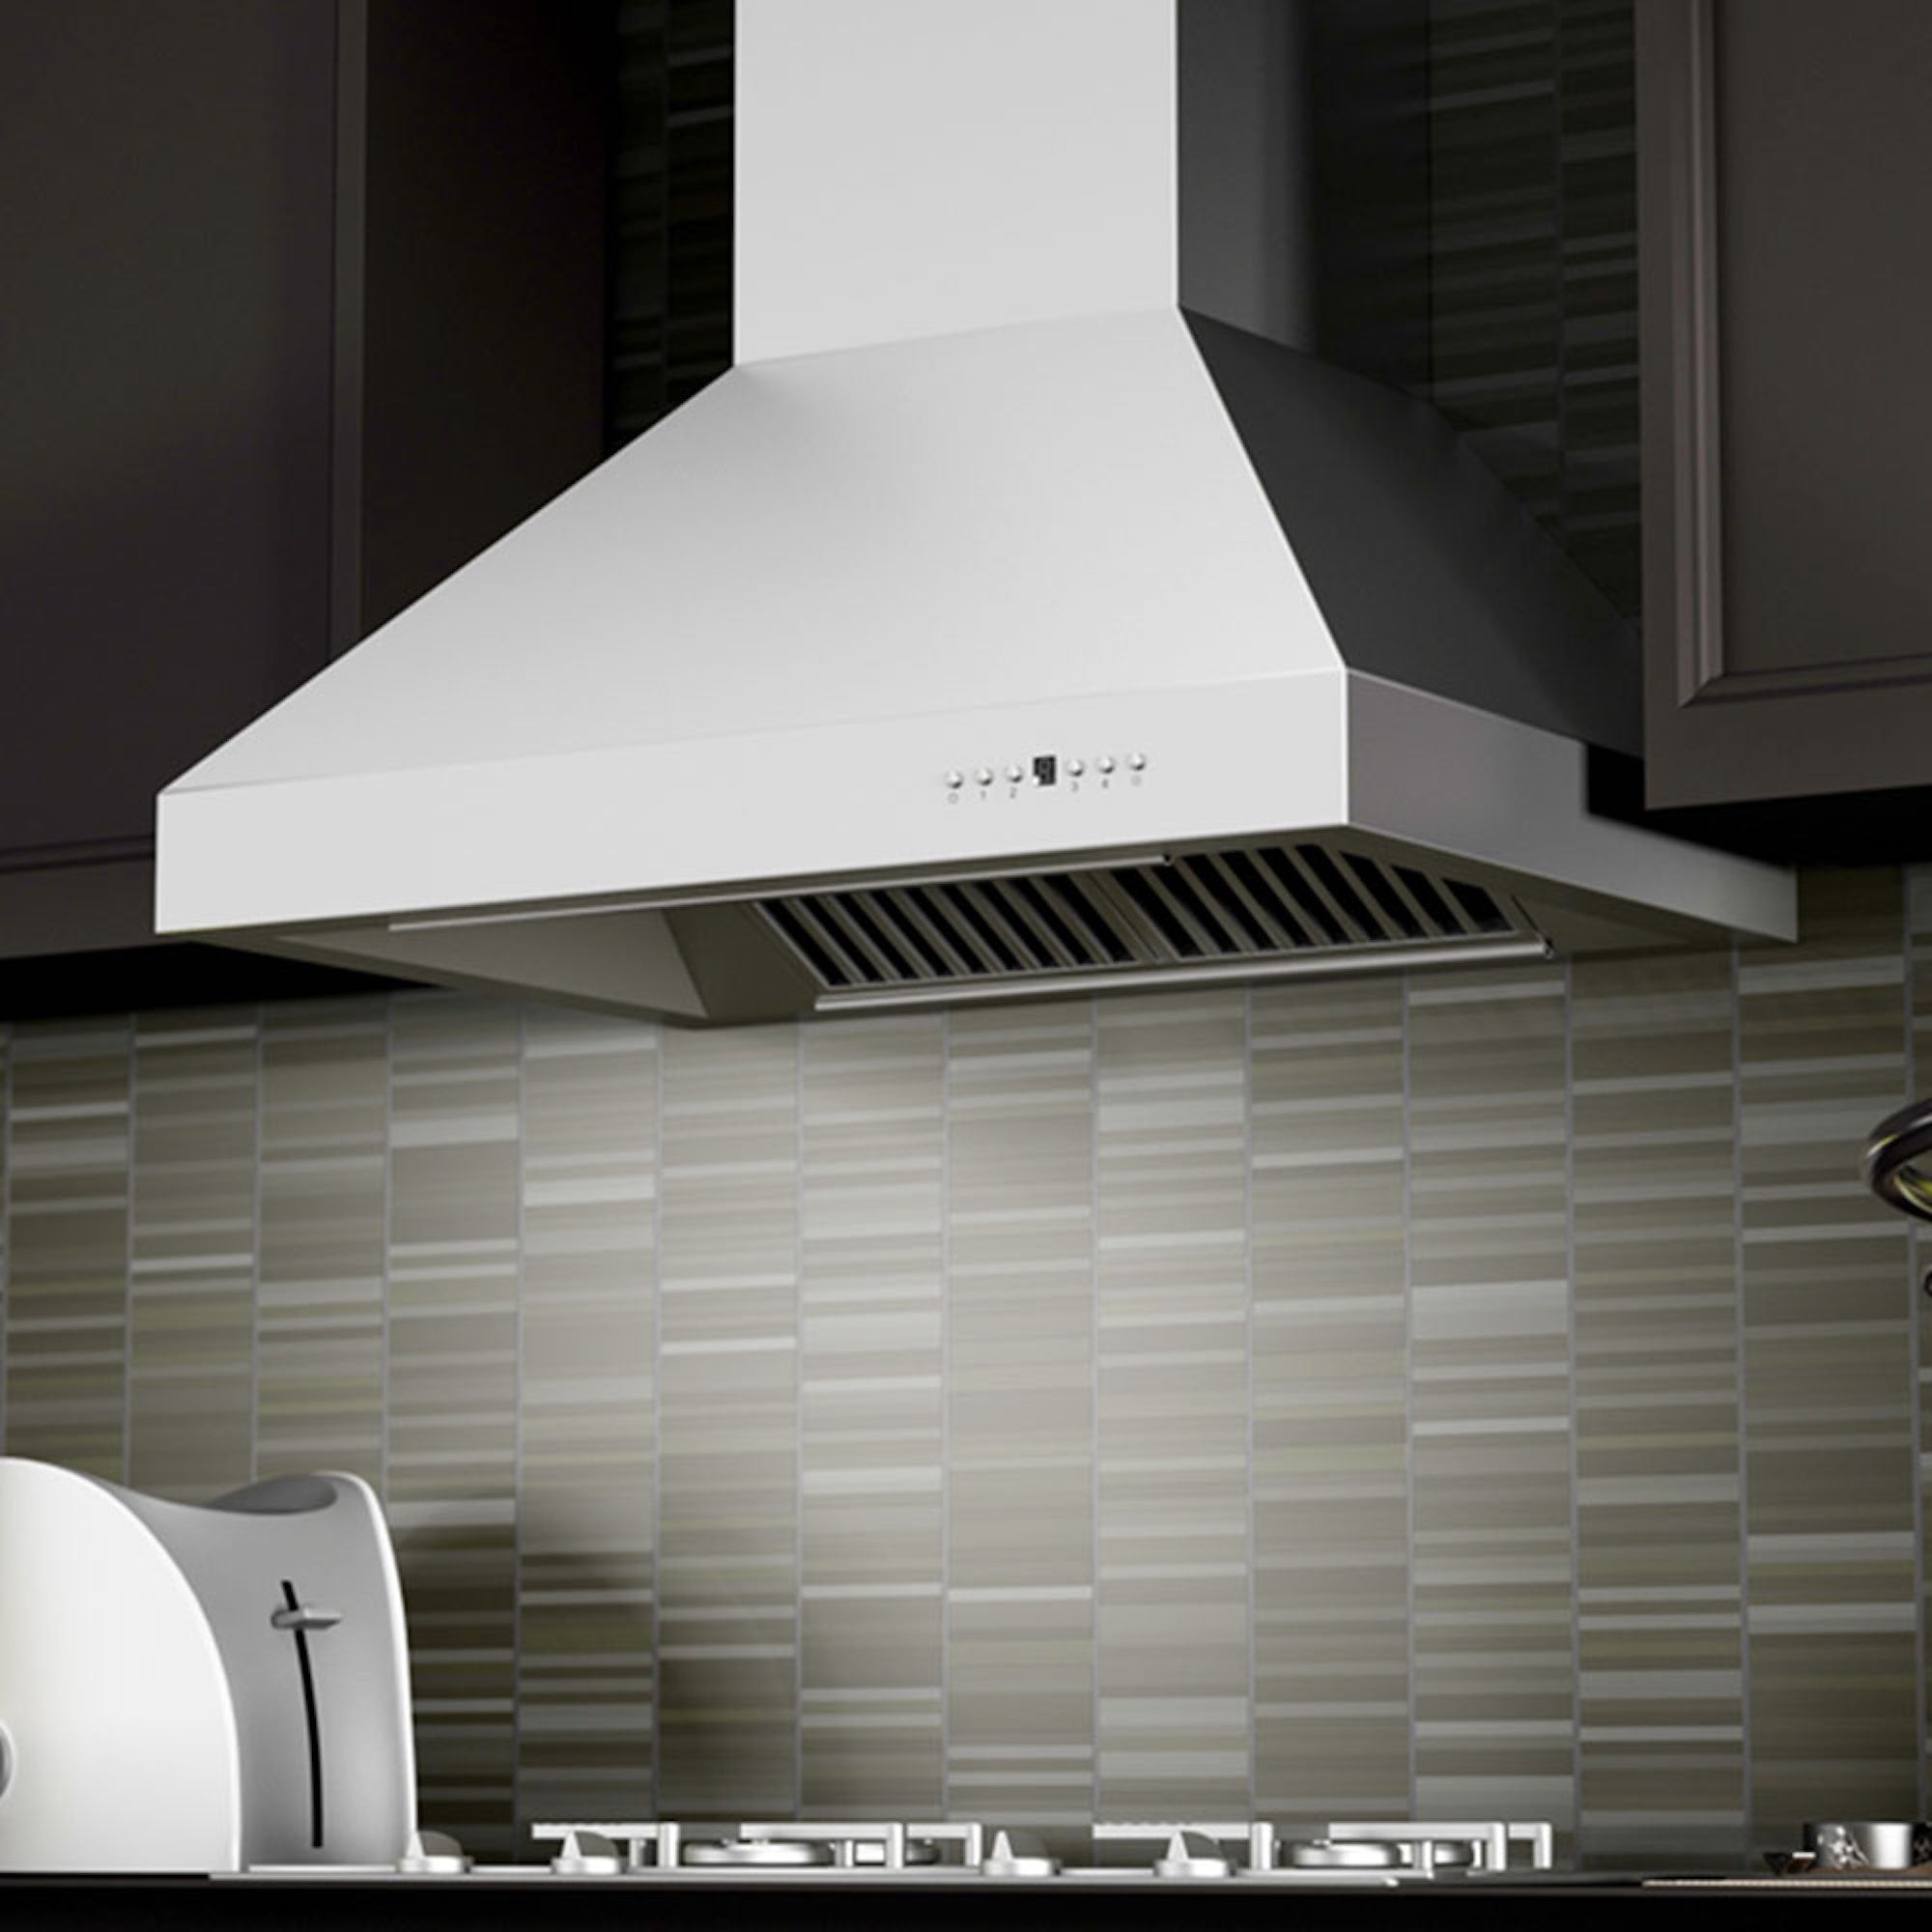 ZLINE Outdoor Wall Mount Range Hood in Outdoor Approved Stainless Steel (667-304) rendering in a modern kitchen.